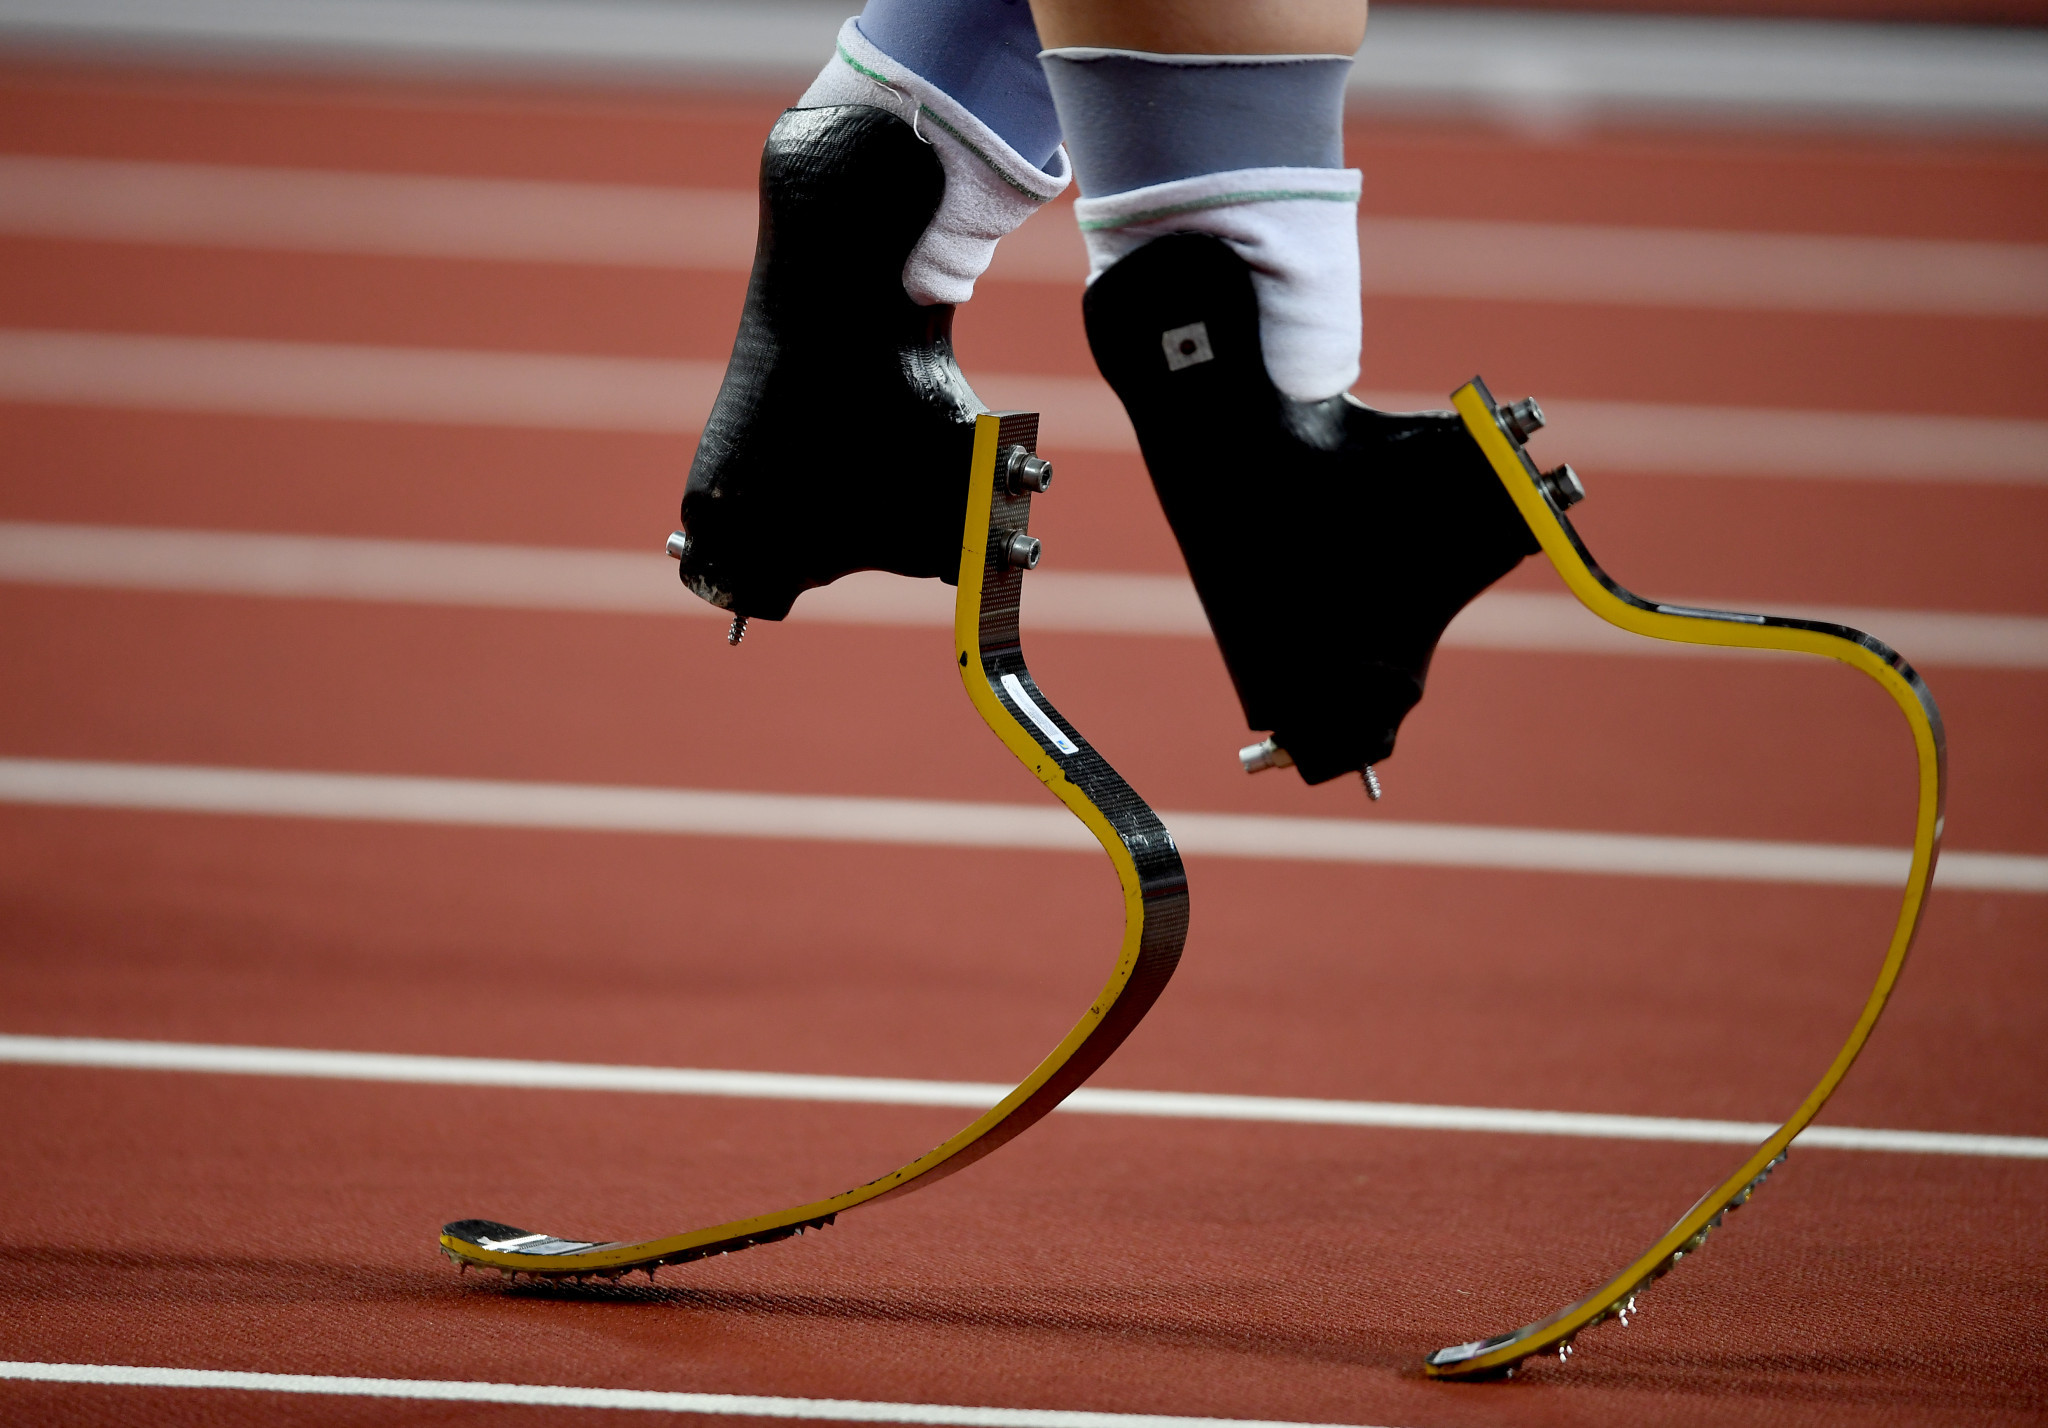 Athletics Australia could introduce a registry in future to reuse Para athletics equipment ©Getty Images